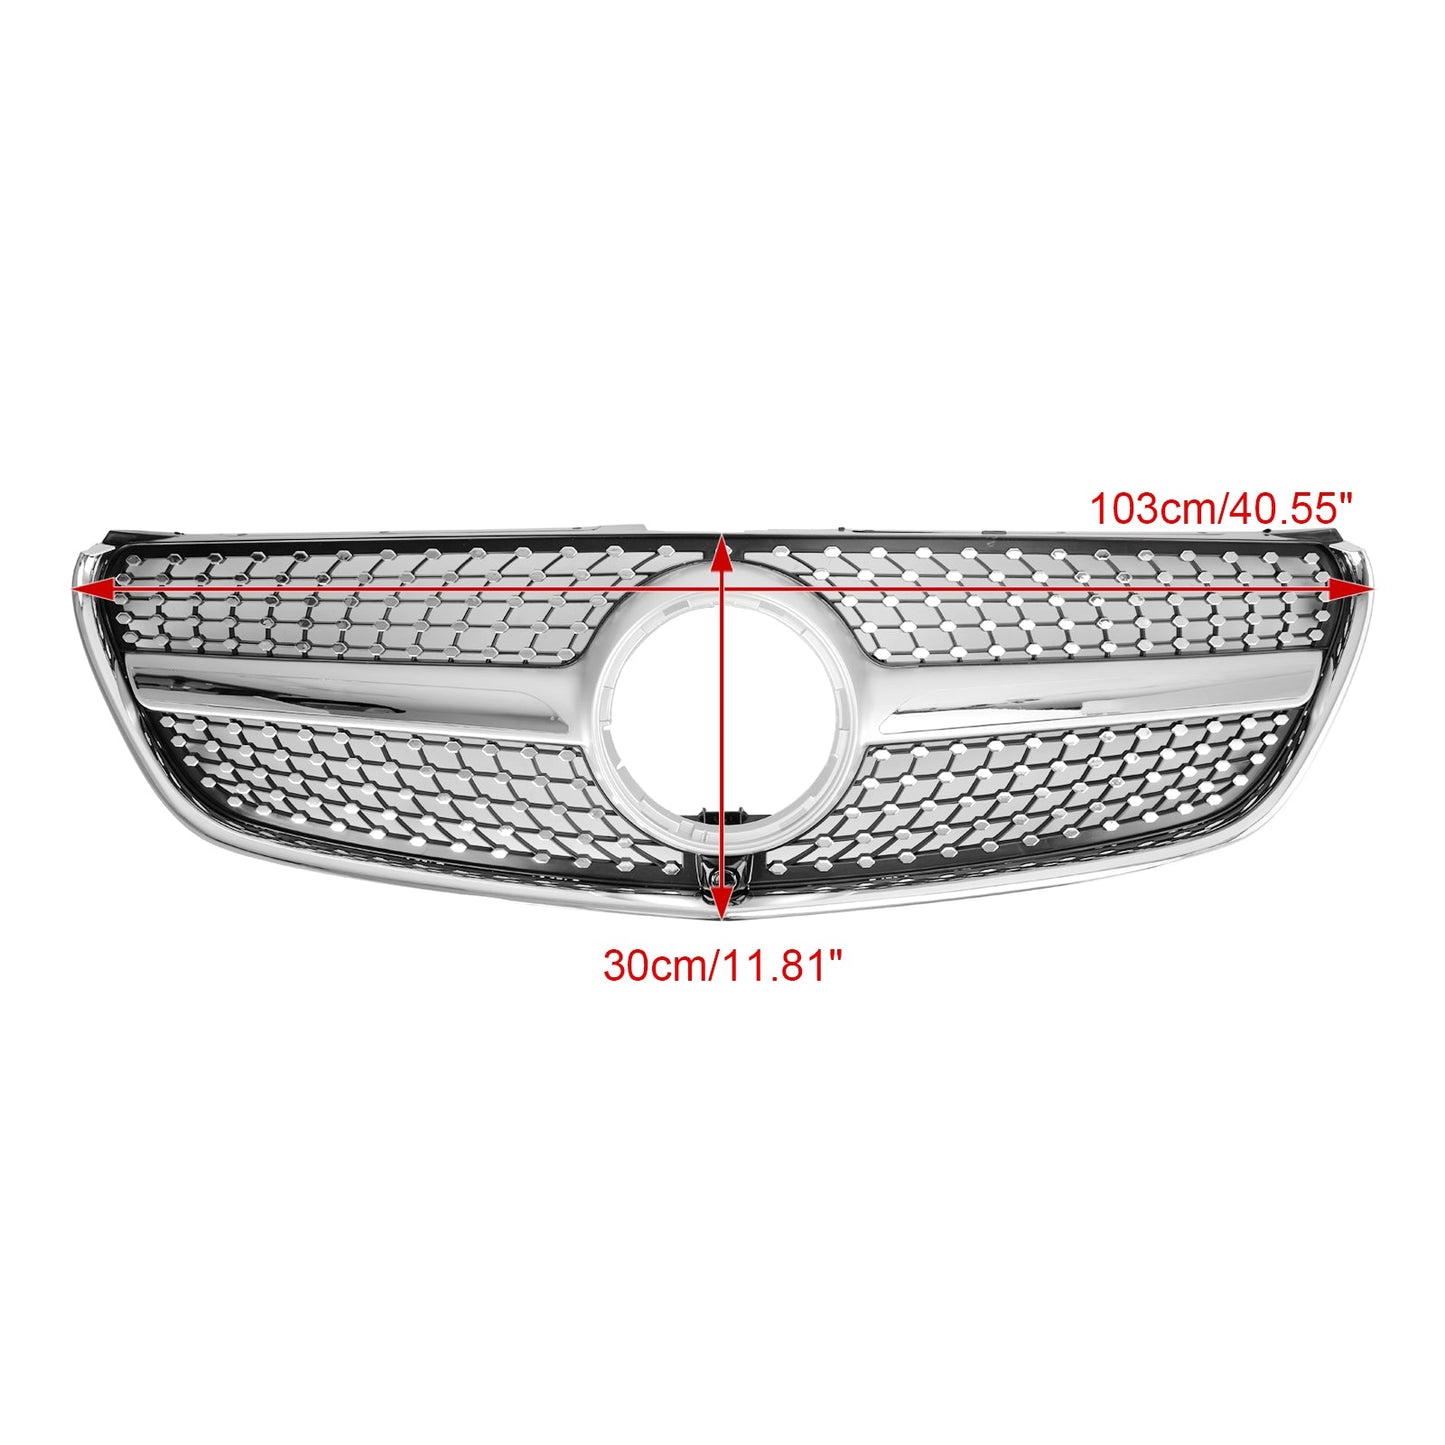 V Class W447 2014-2019 Mercedes Benz Grill Diamond Front Upper Grille Grill